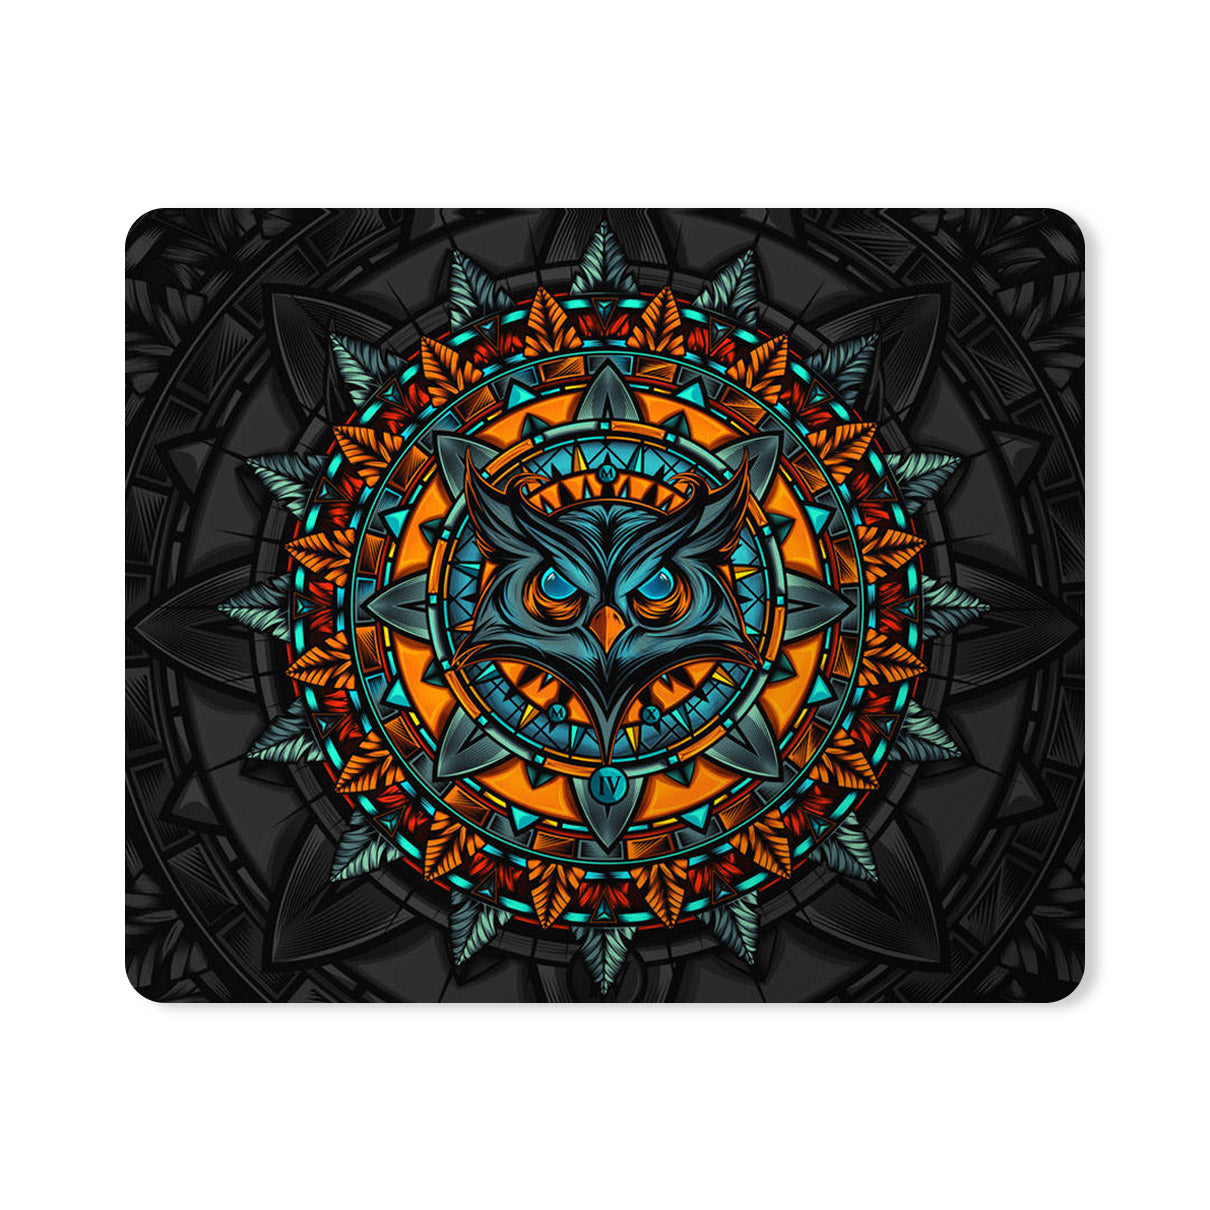 Own Art Abstract Designer Printed Premium Mouse pad (9 in x 7.5 in)